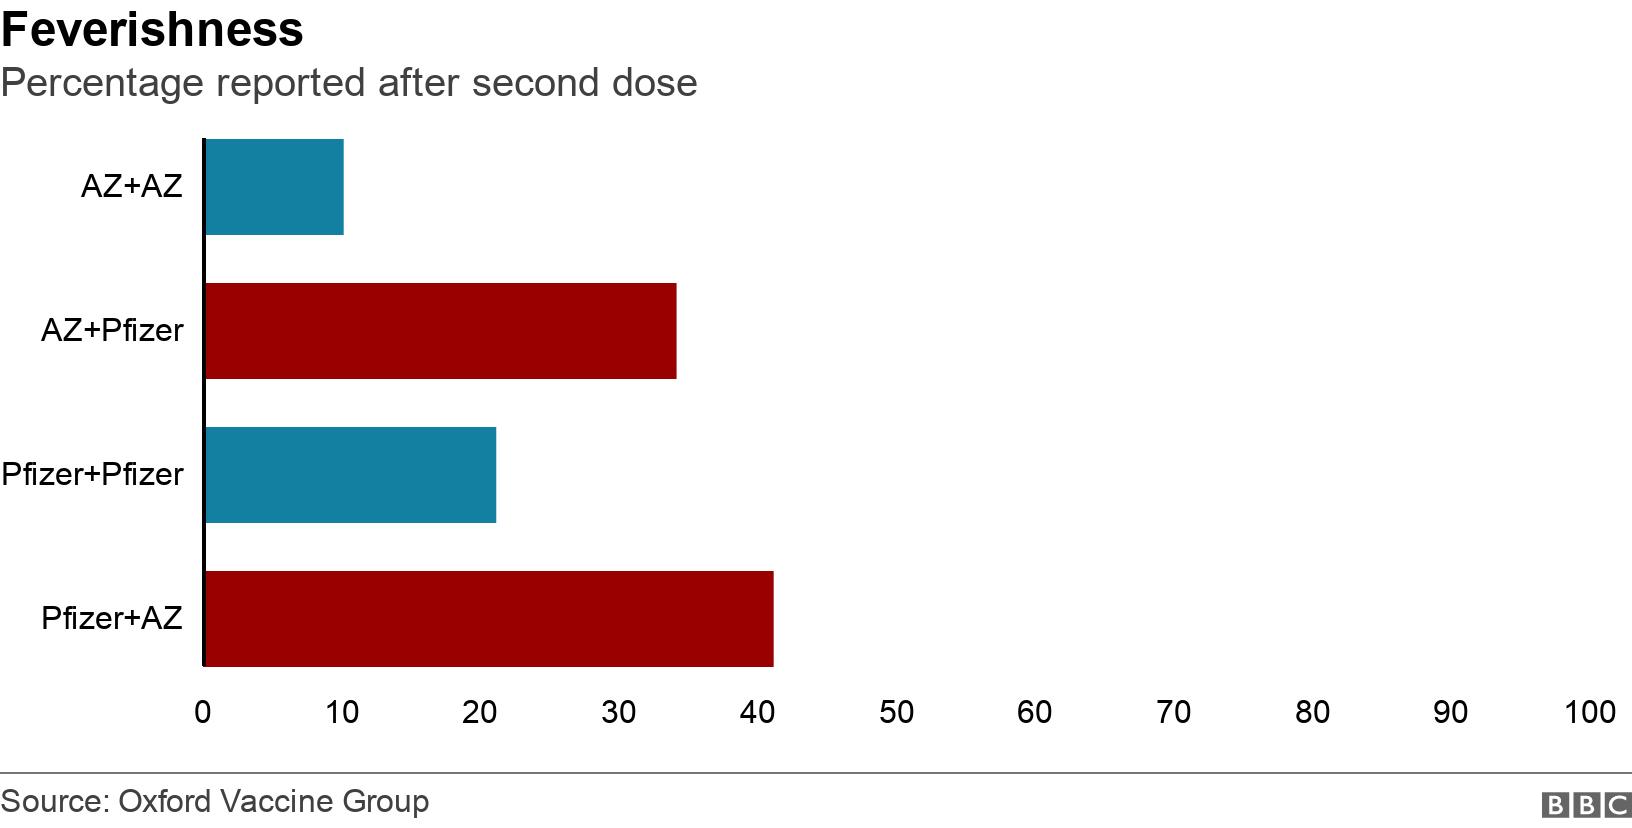 Feverishness. Percentage reported after second dose. Data showing percentage of people who reported fatigue symptoms after second dose .